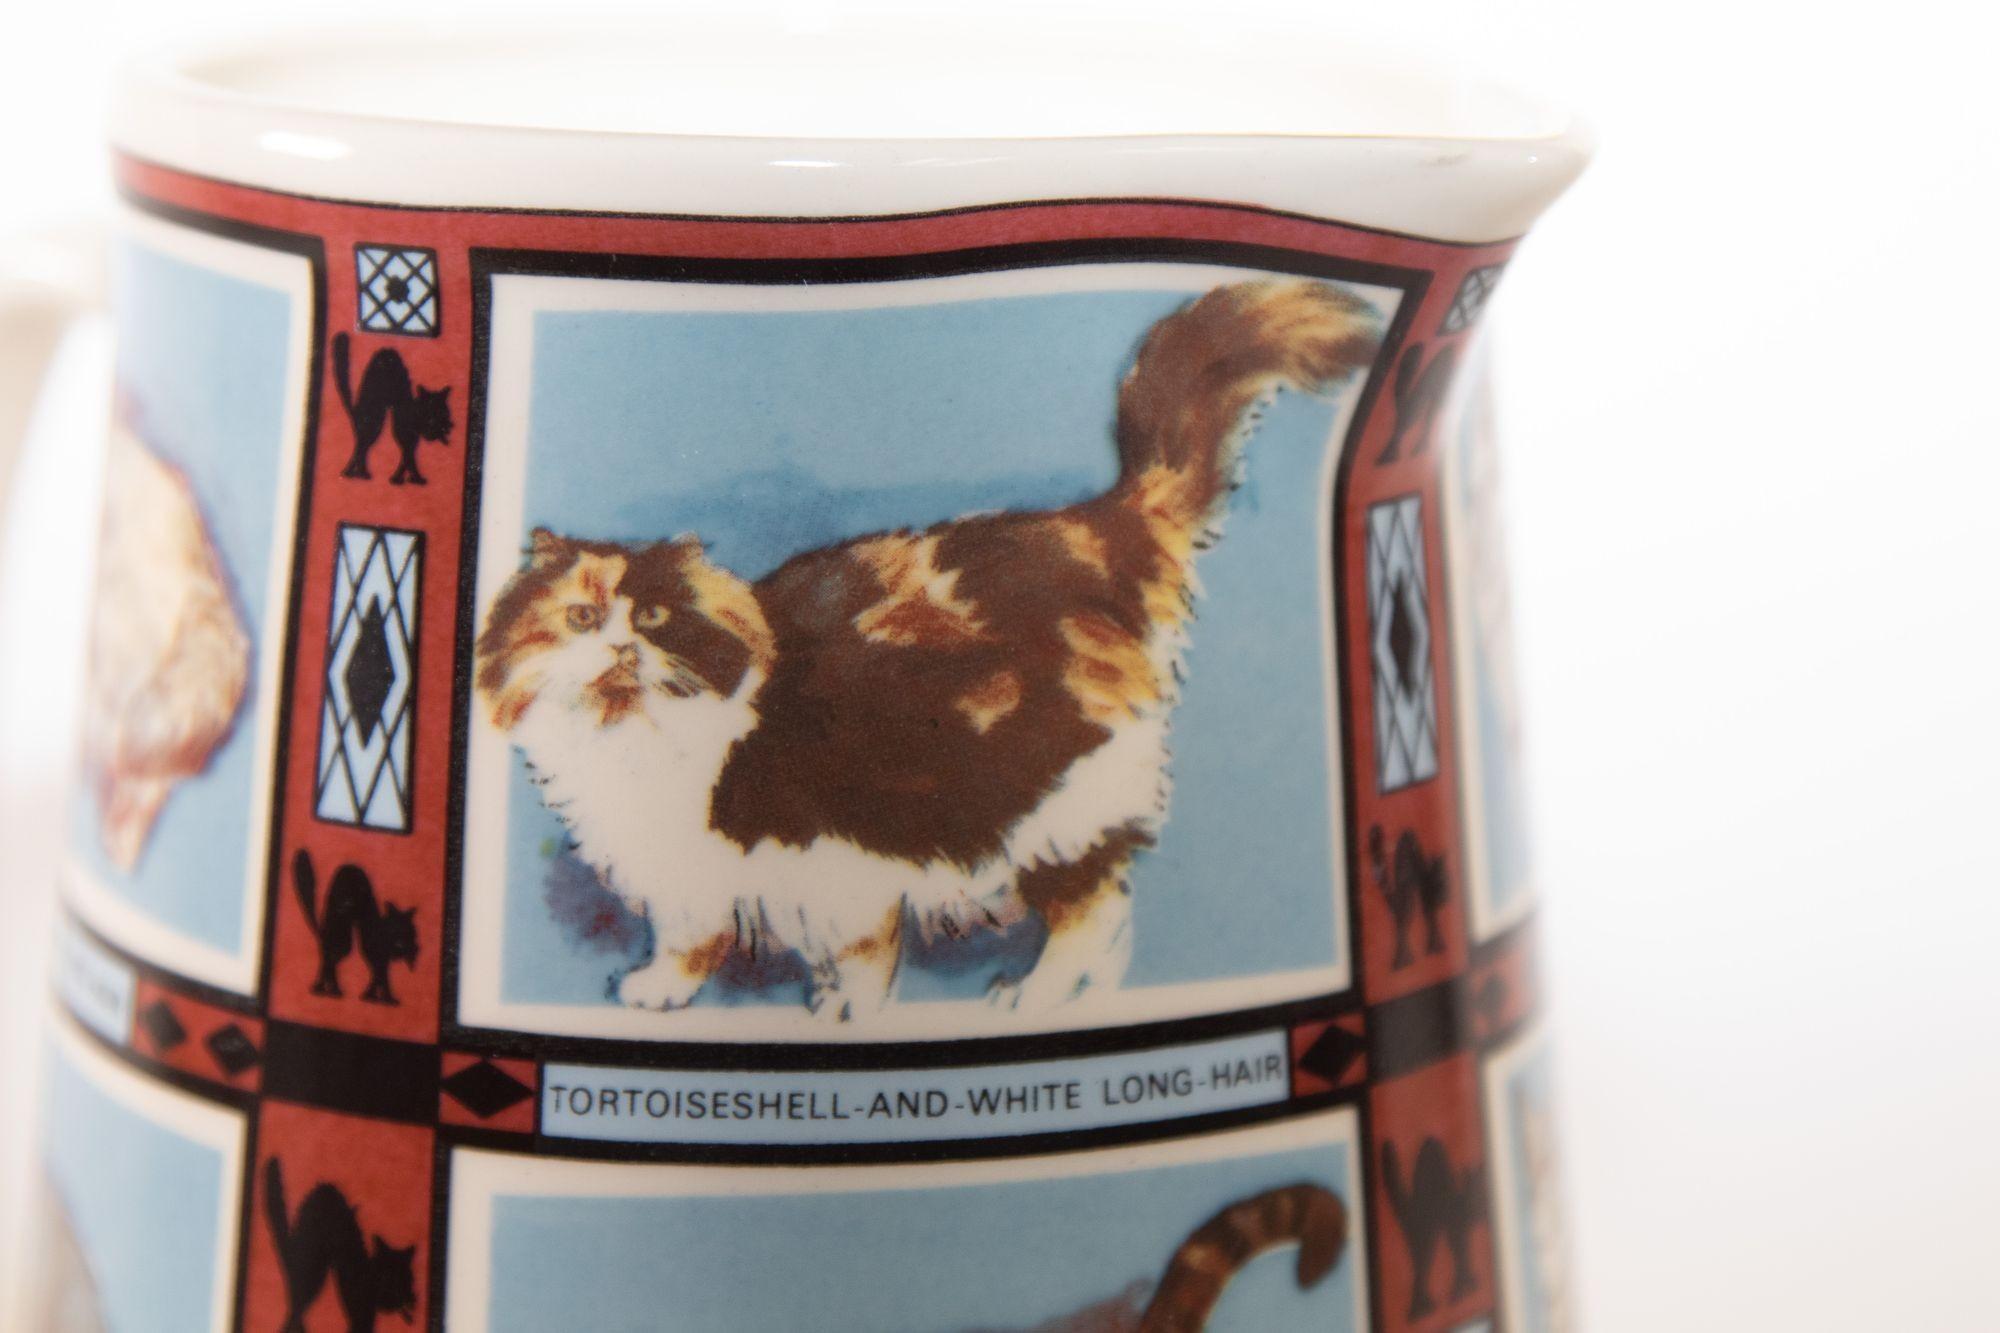 Vintage 1970s Ceramic Pitcher, Derbyshire England with Cat Breeds Pictures 5